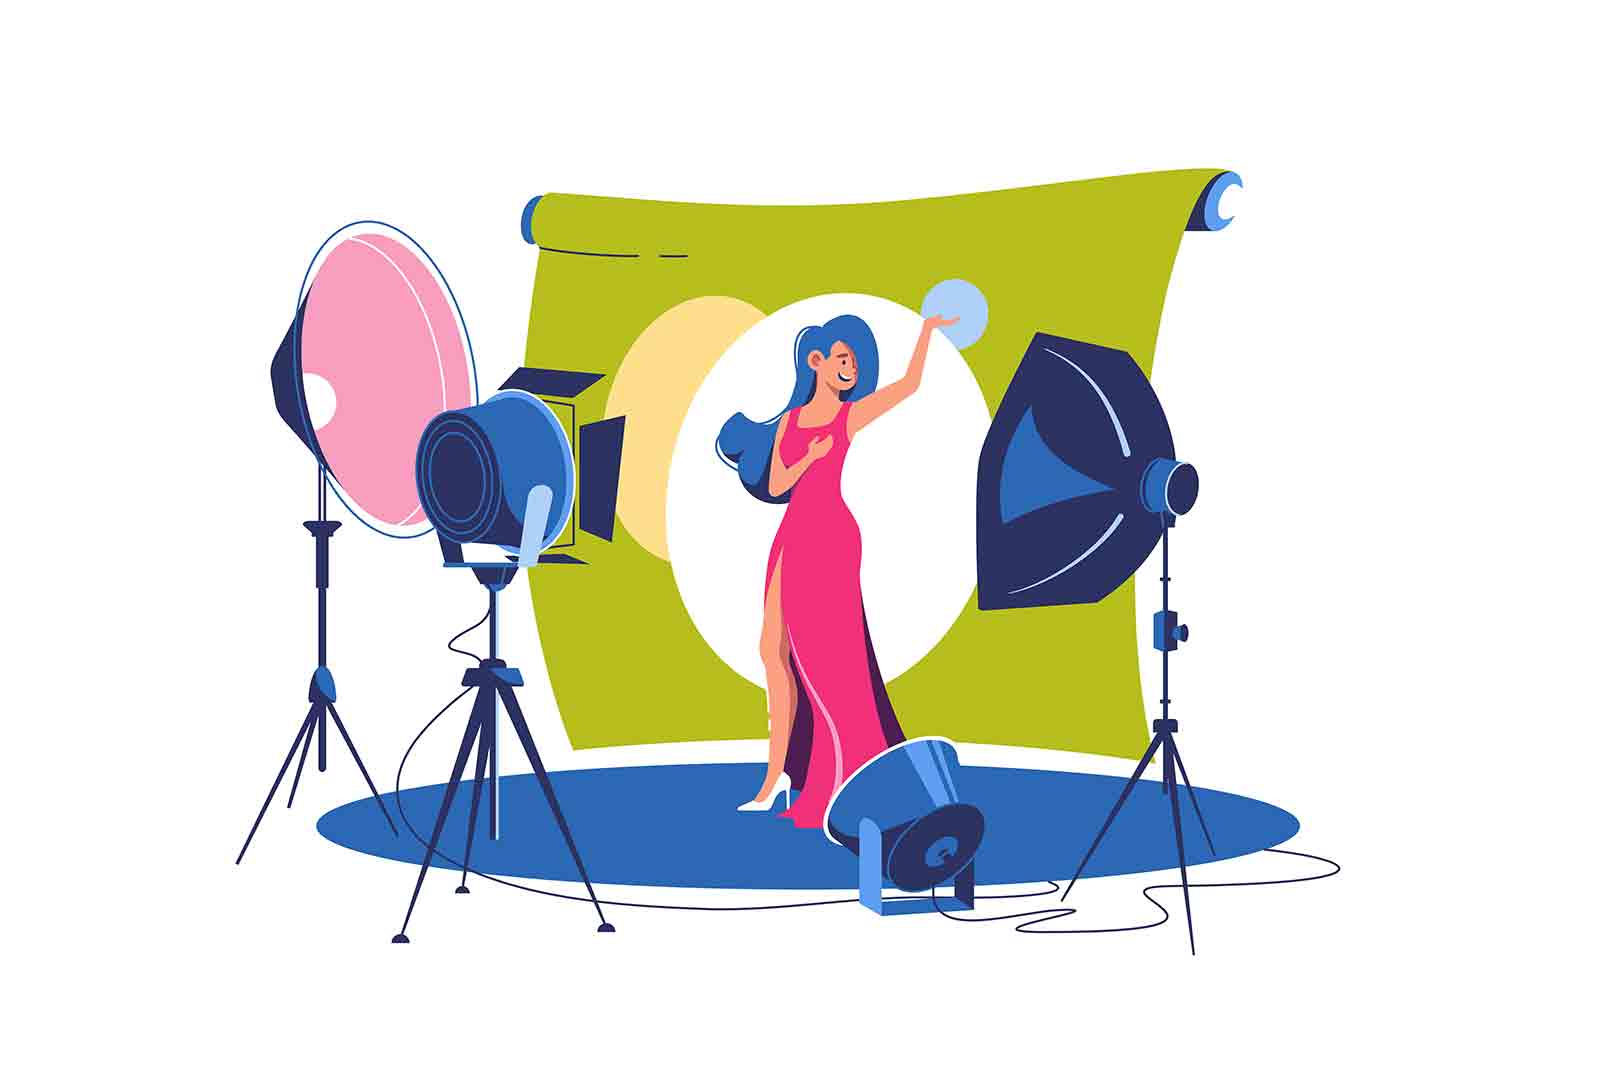 Professional photo studio lighting equipment and lights vector illustration. Spotlights, tripod stands with flash lamp, umbrella and floodlight